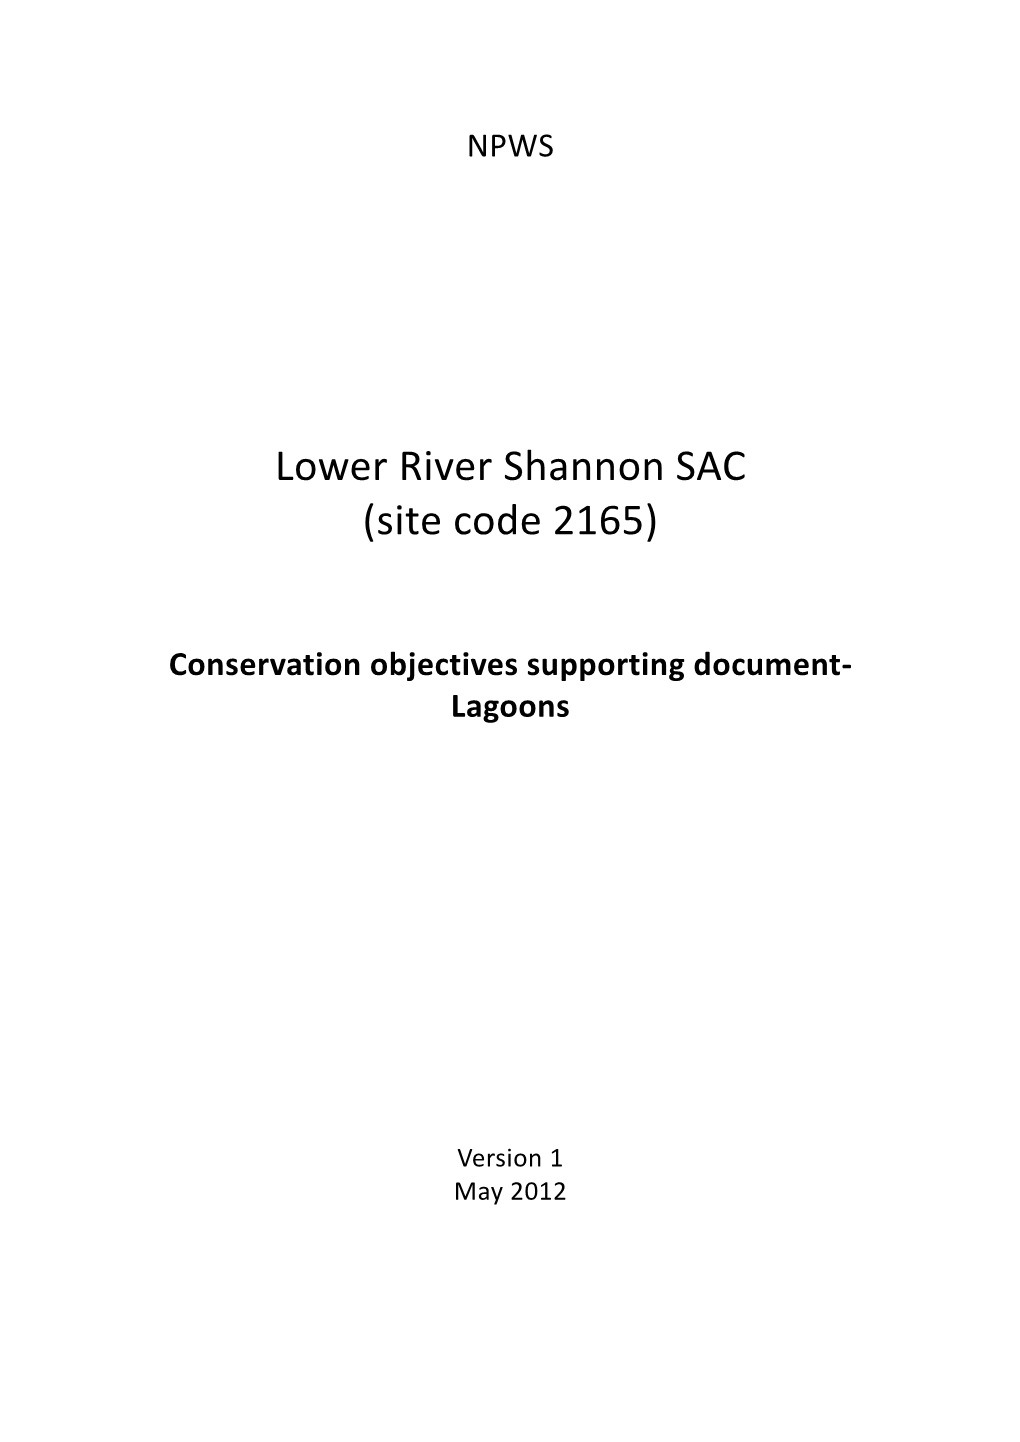 Lower River Shannon SAC (Site Code 2165)